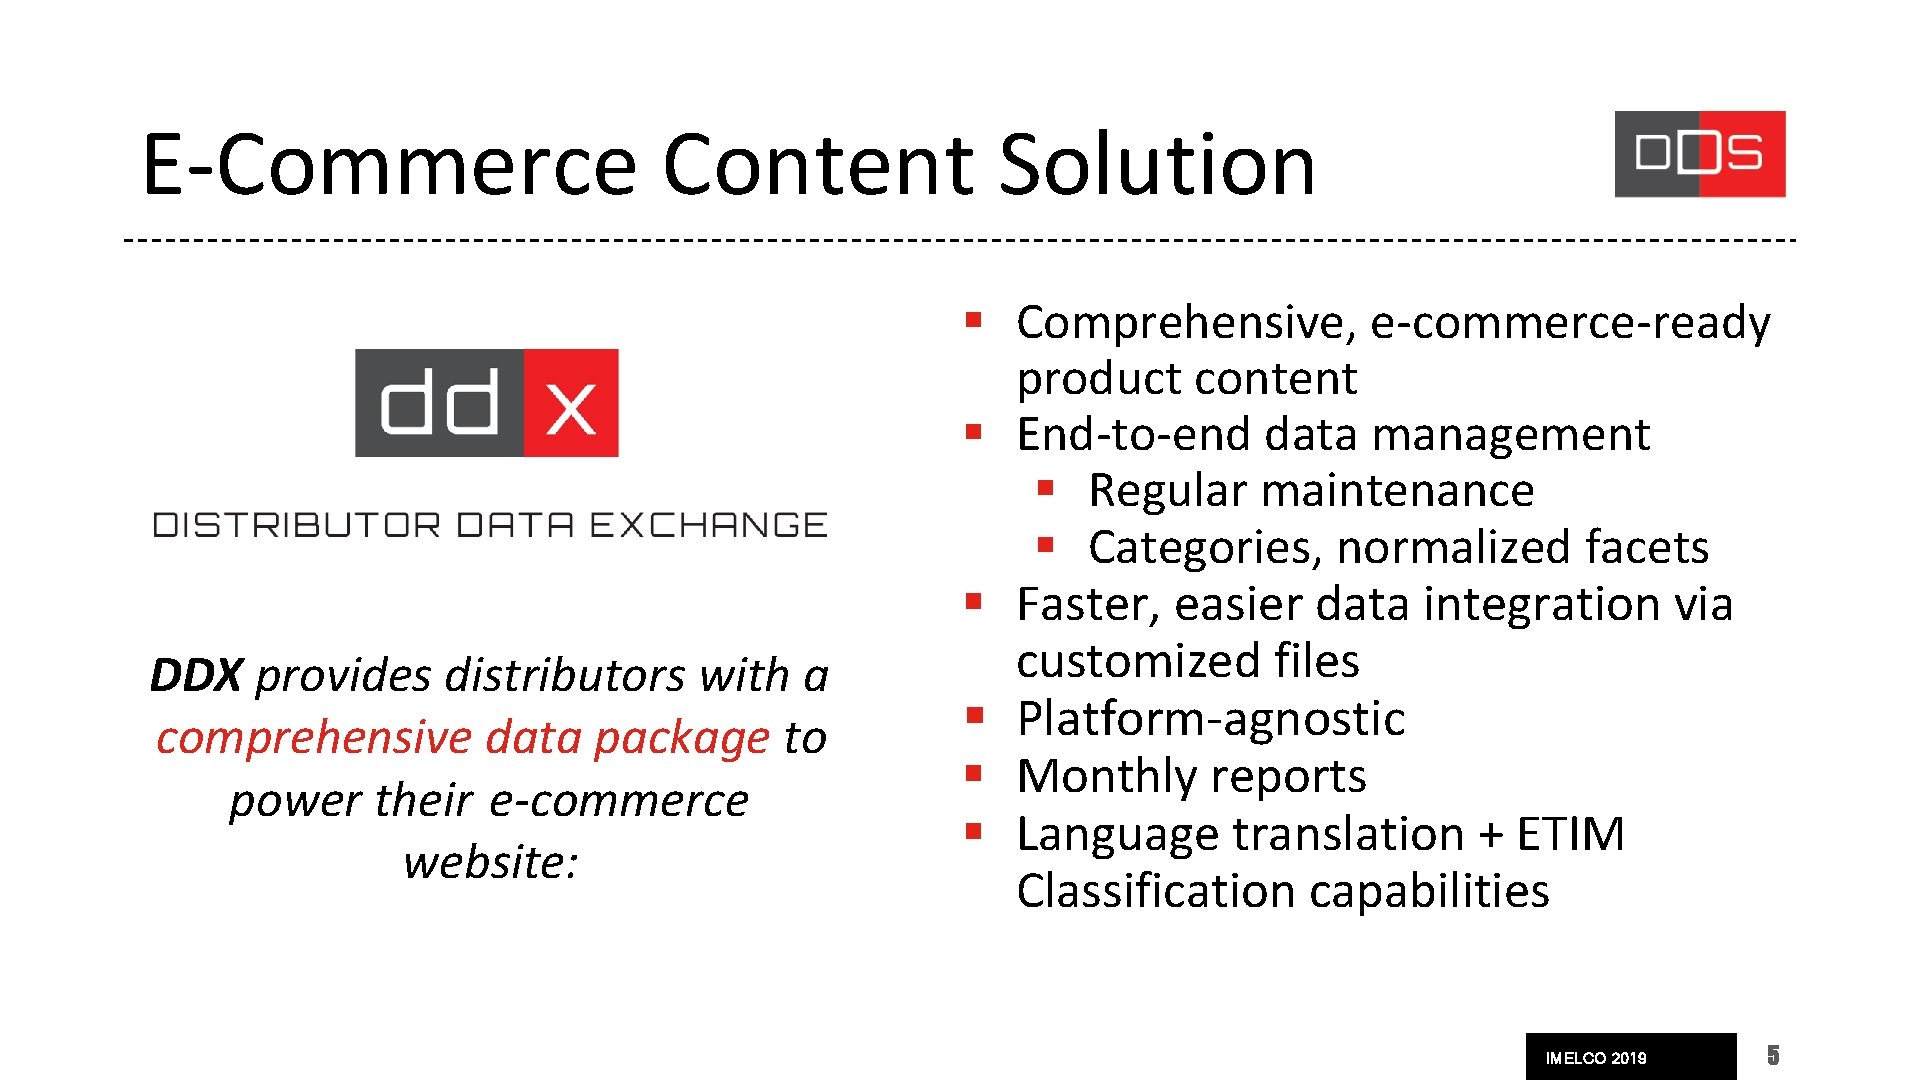 E-Commerce Content Solution DDX provides distributors with a comprehensive data package to power their